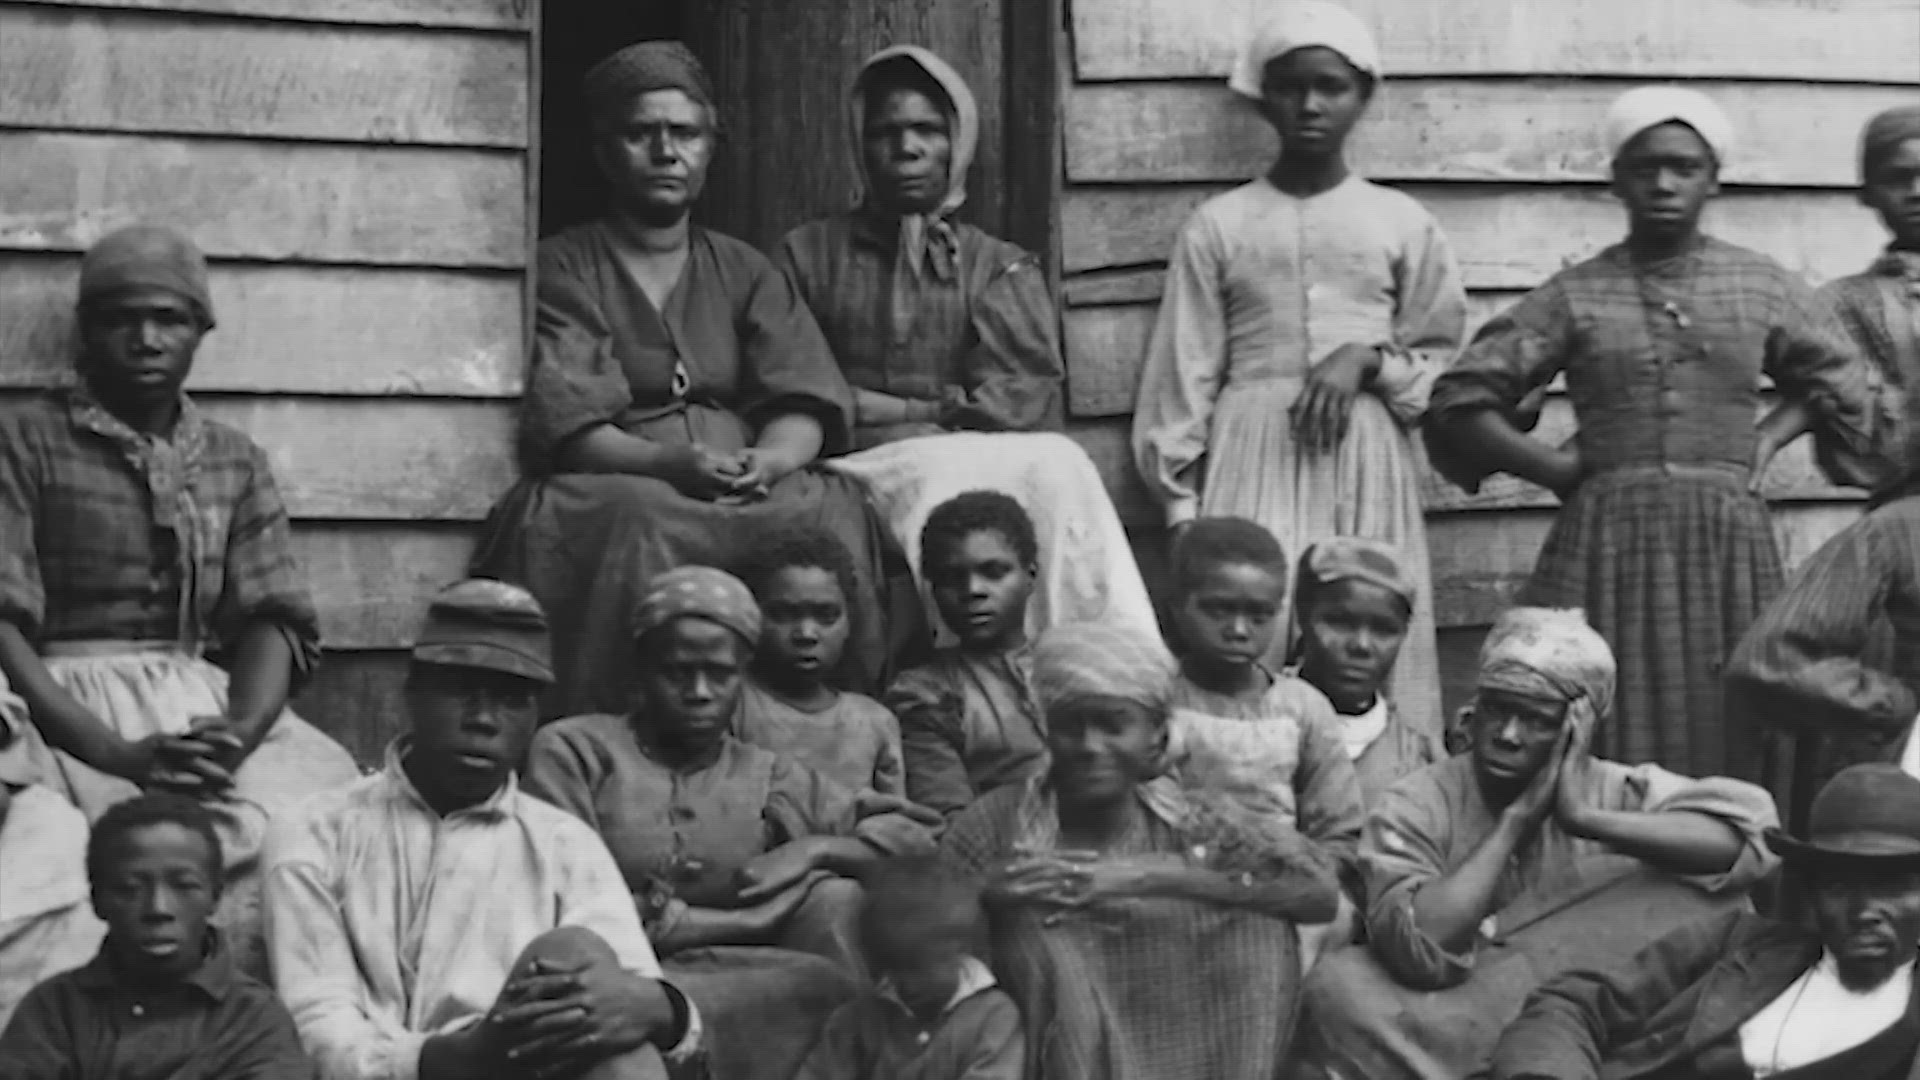 Curiosity is the foundation that sets many off on the path to finding out who they are, but with Black people's ties to slavery, the search isn't always easy.